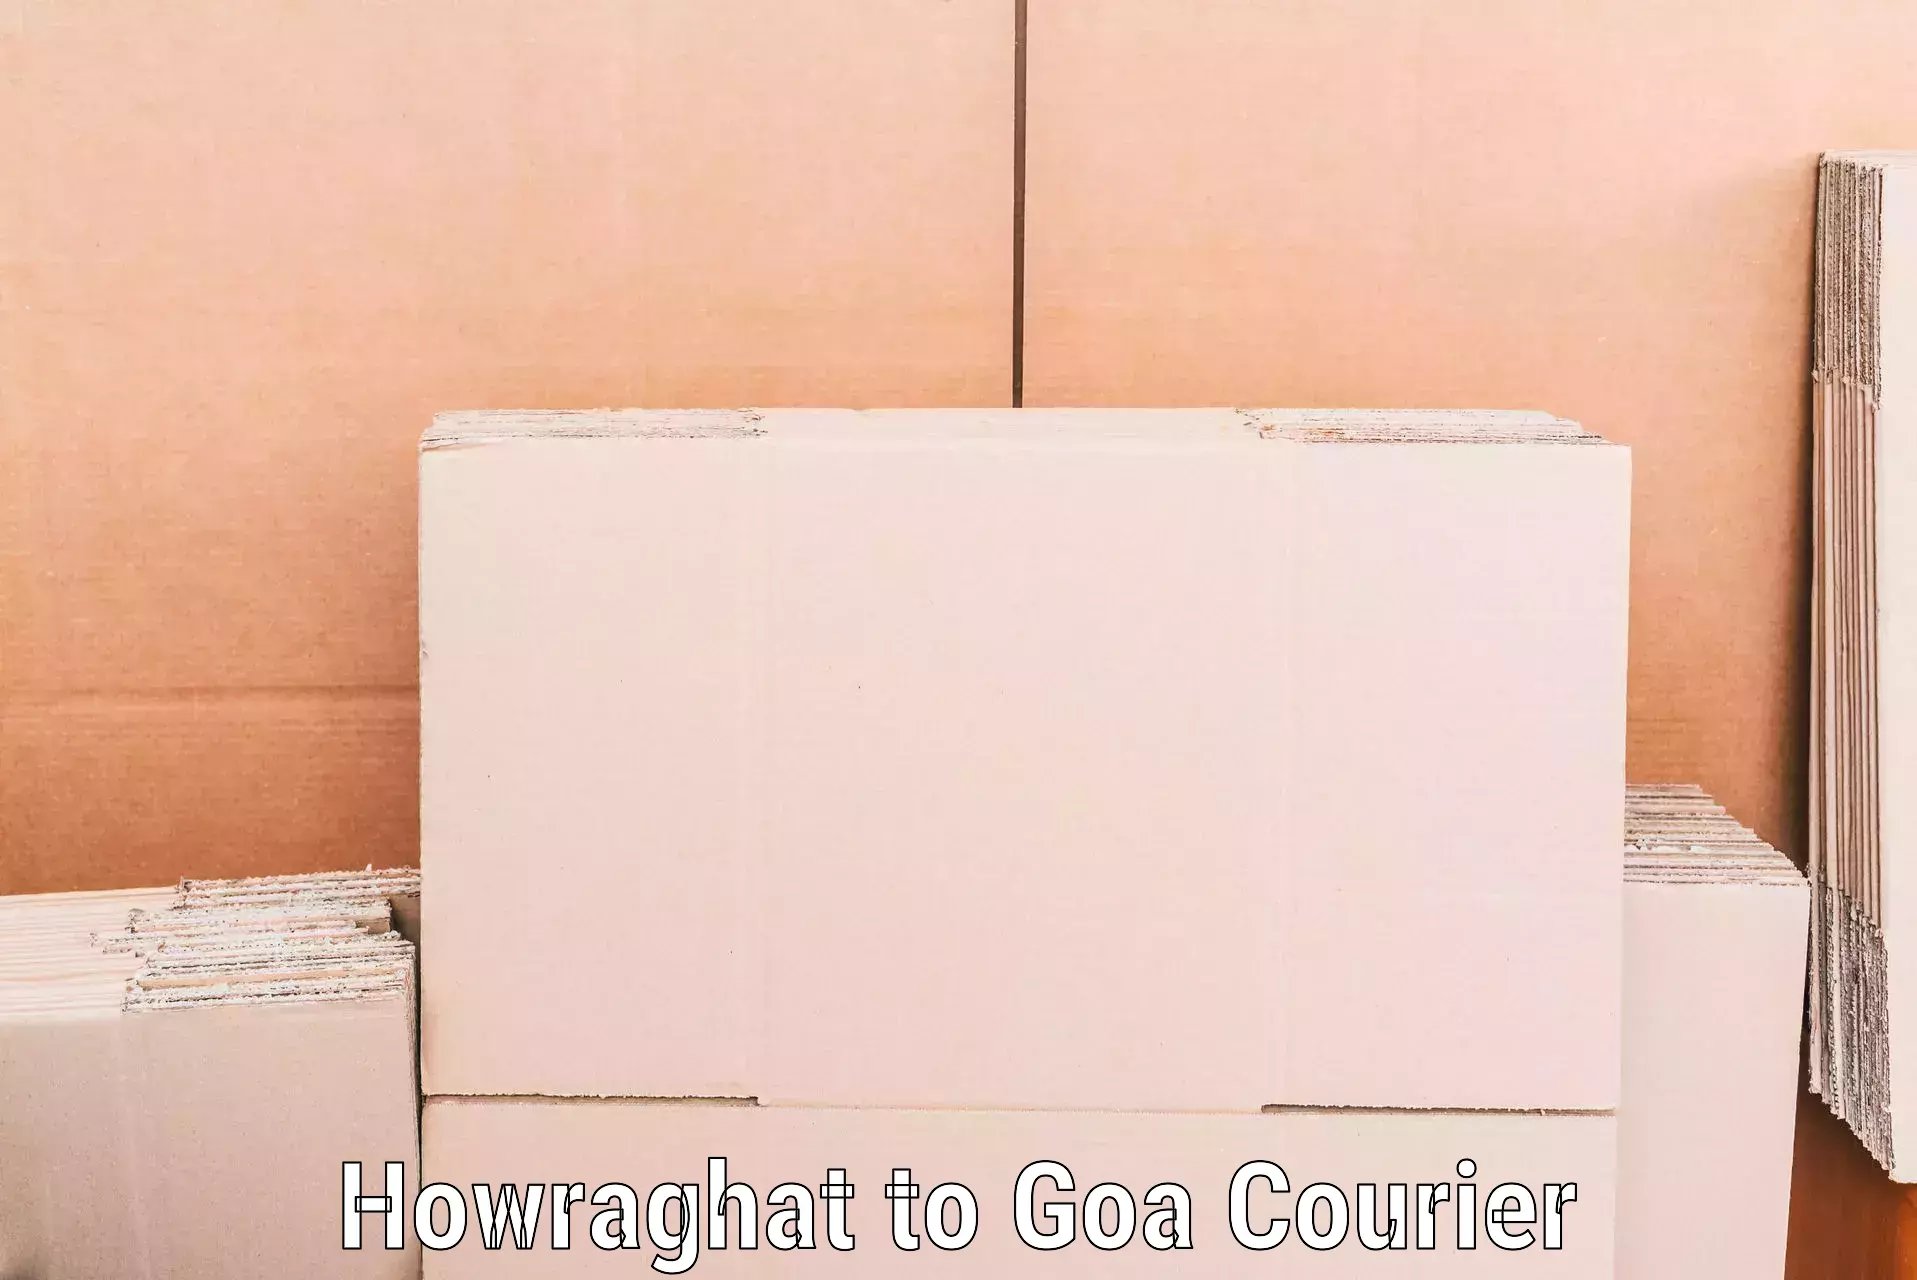 Expert moving and storage Howraghat to South Goa